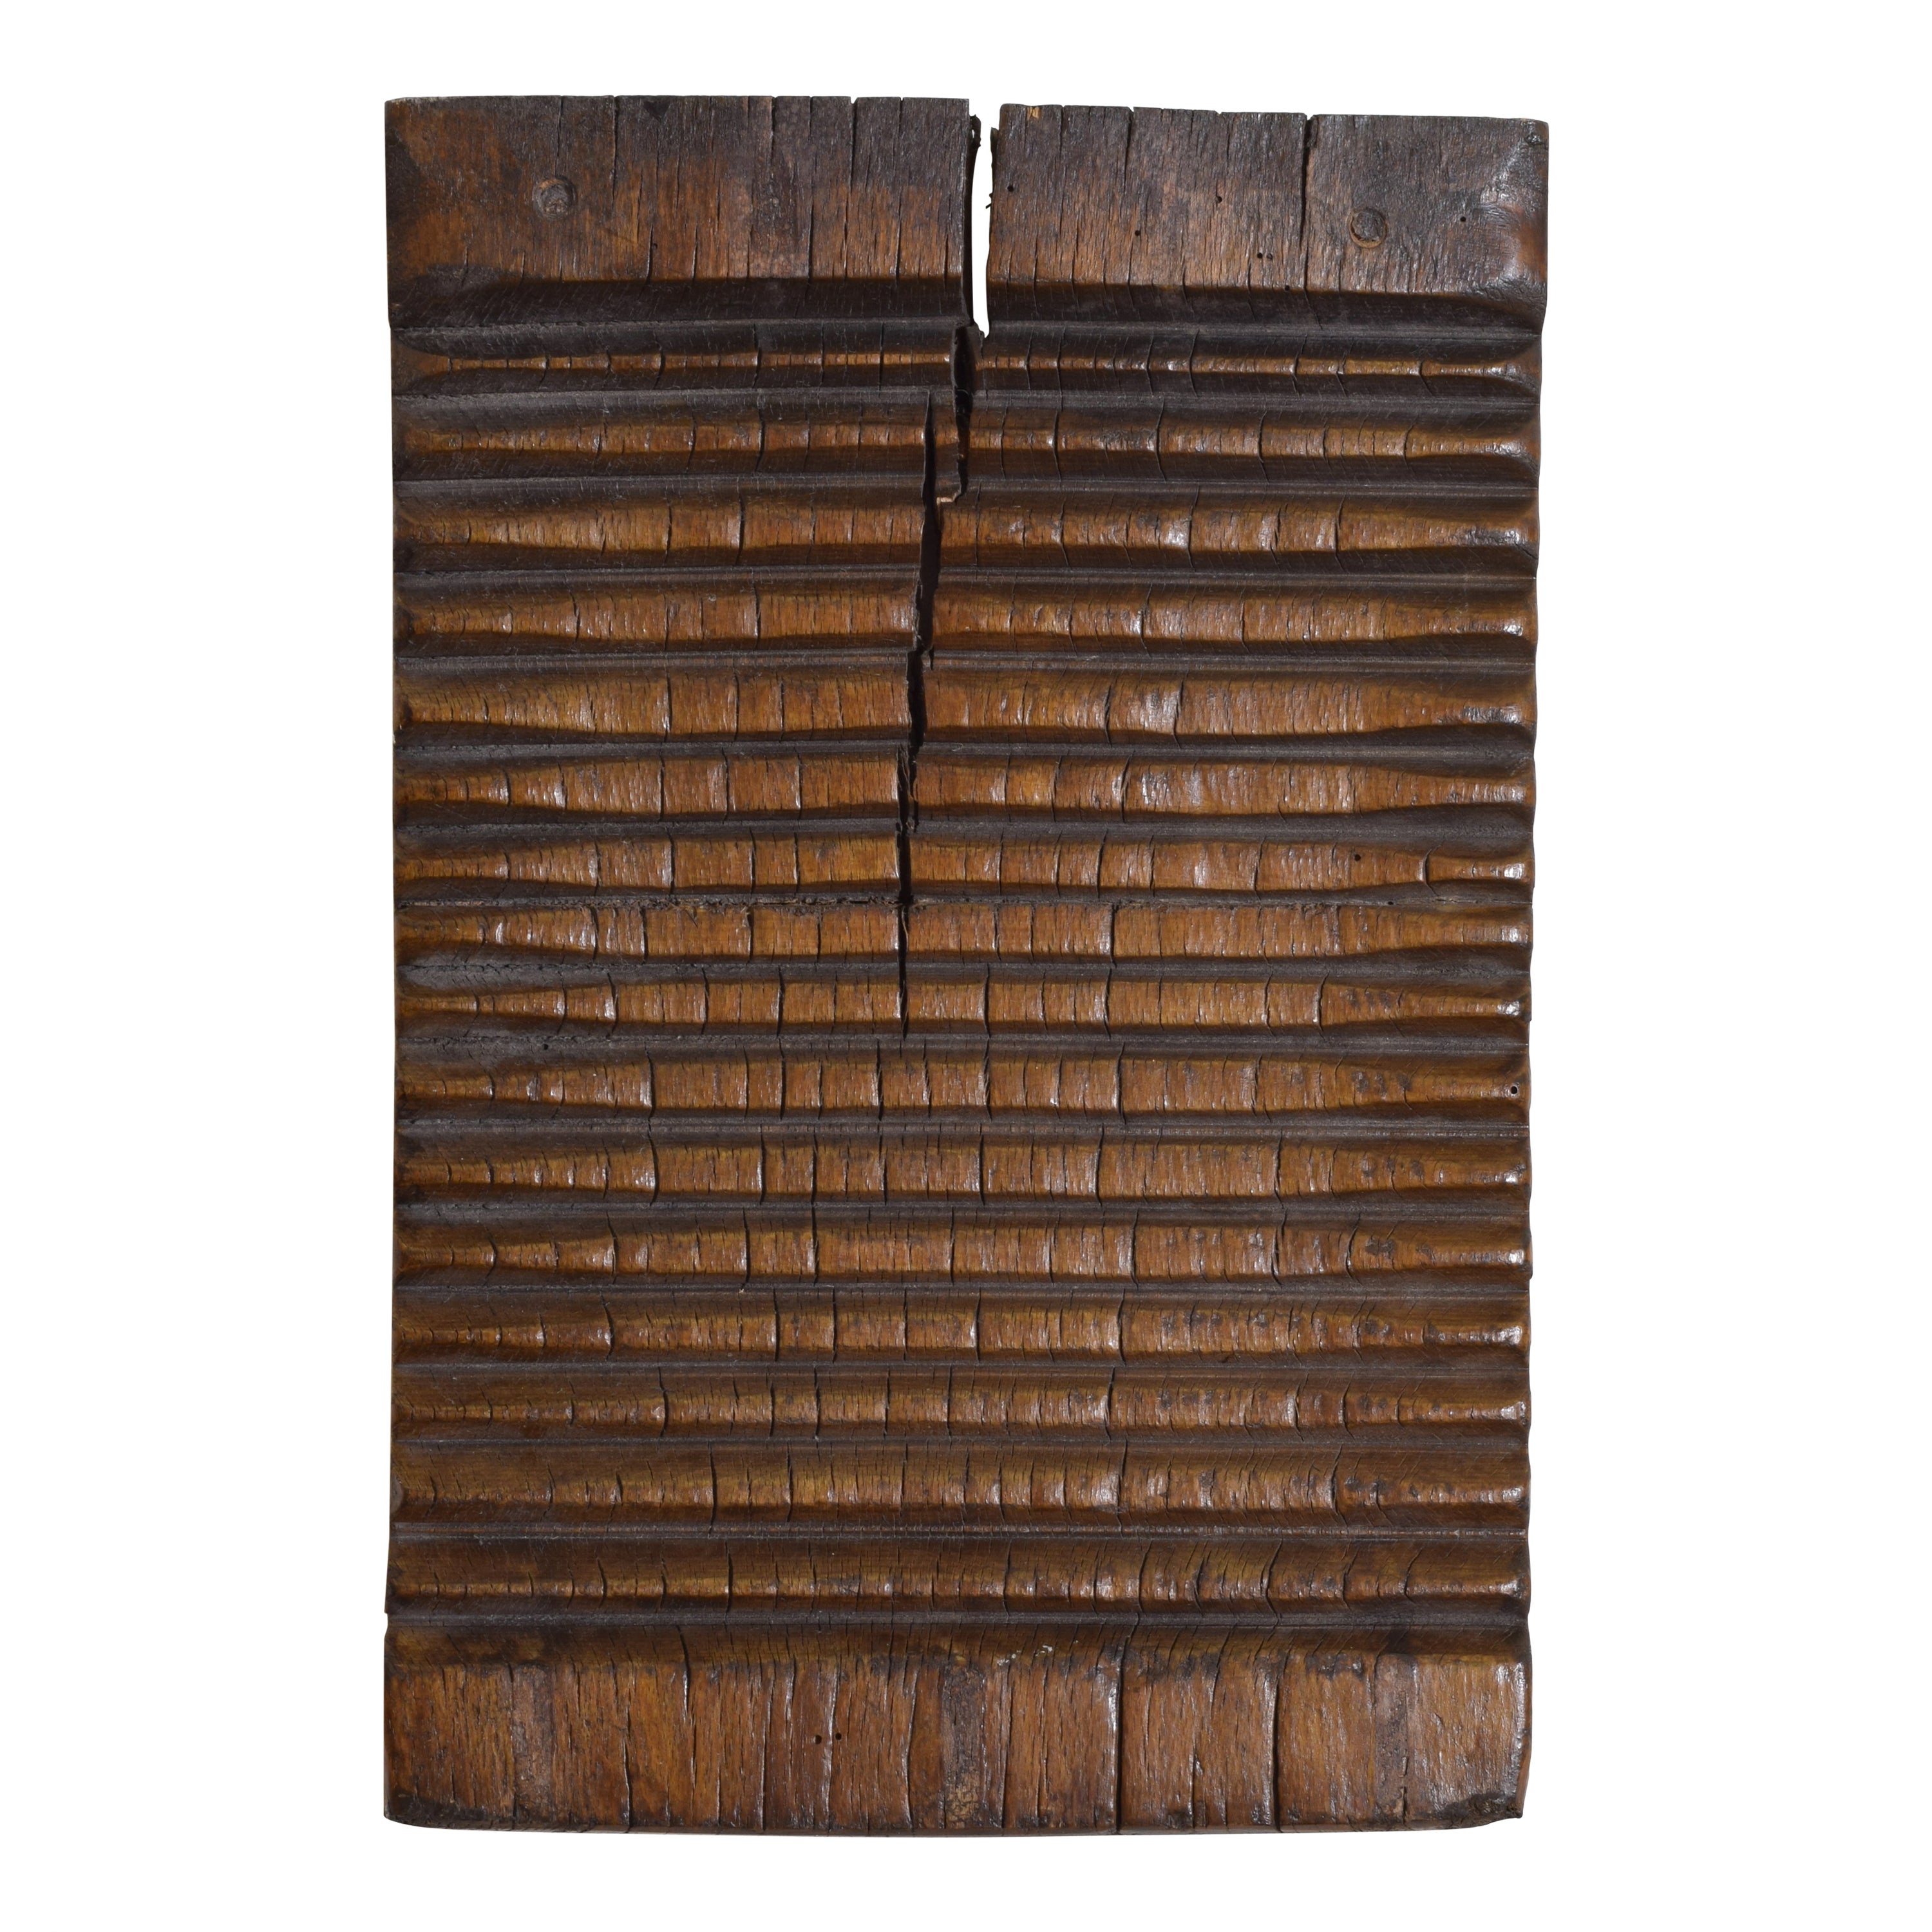 A Belgian Double Sided Washboard in Walnut, 2nd quarter 19th century